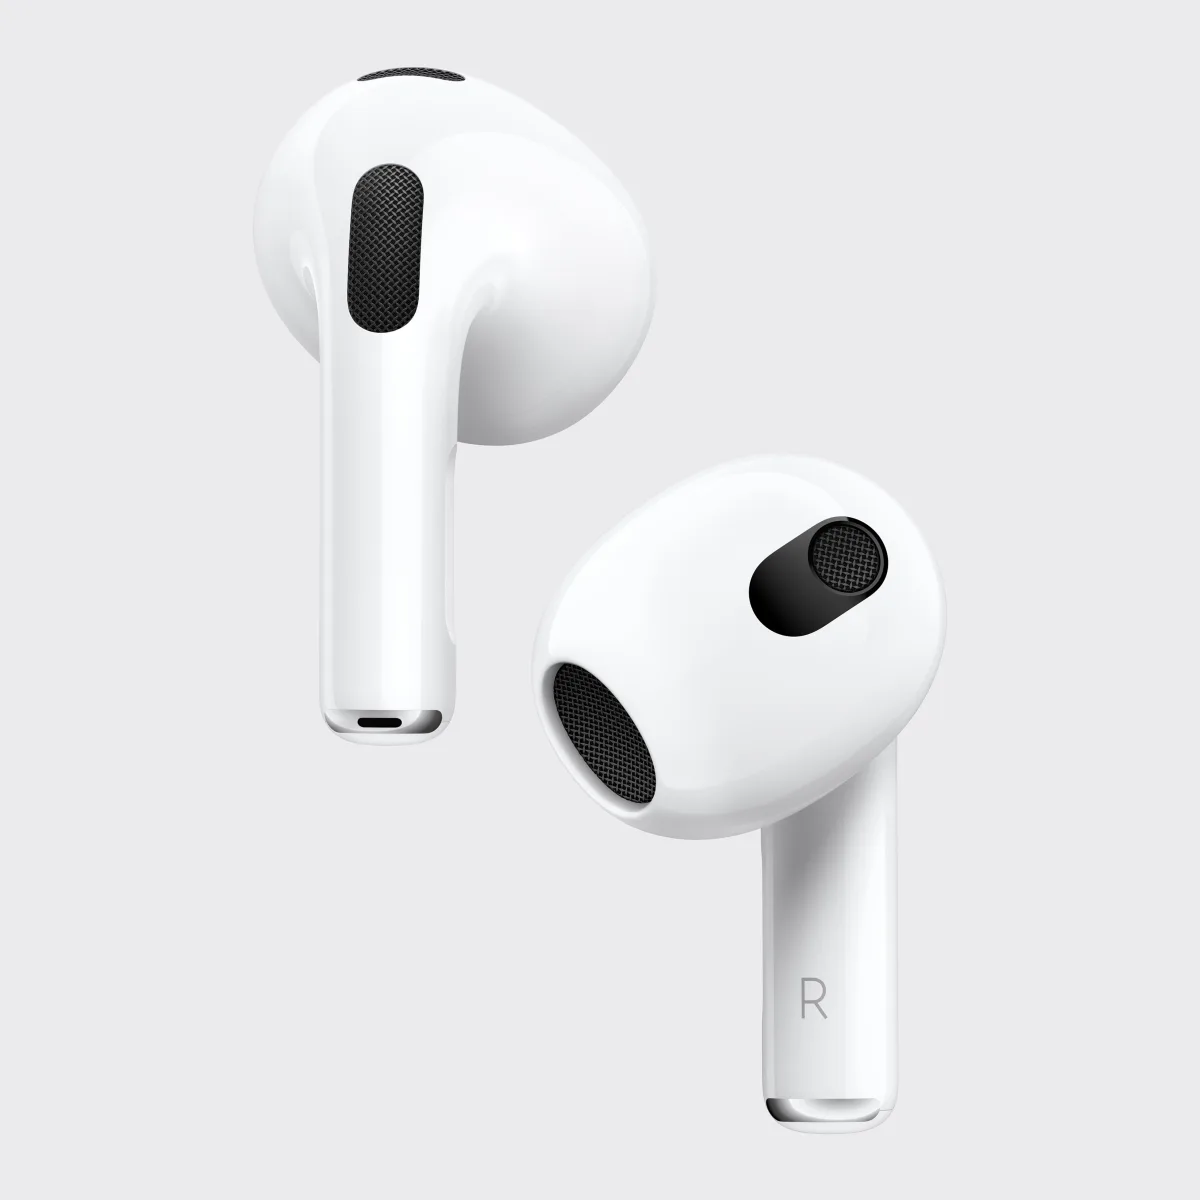 Do AirPods Fit for Small Ears? 1